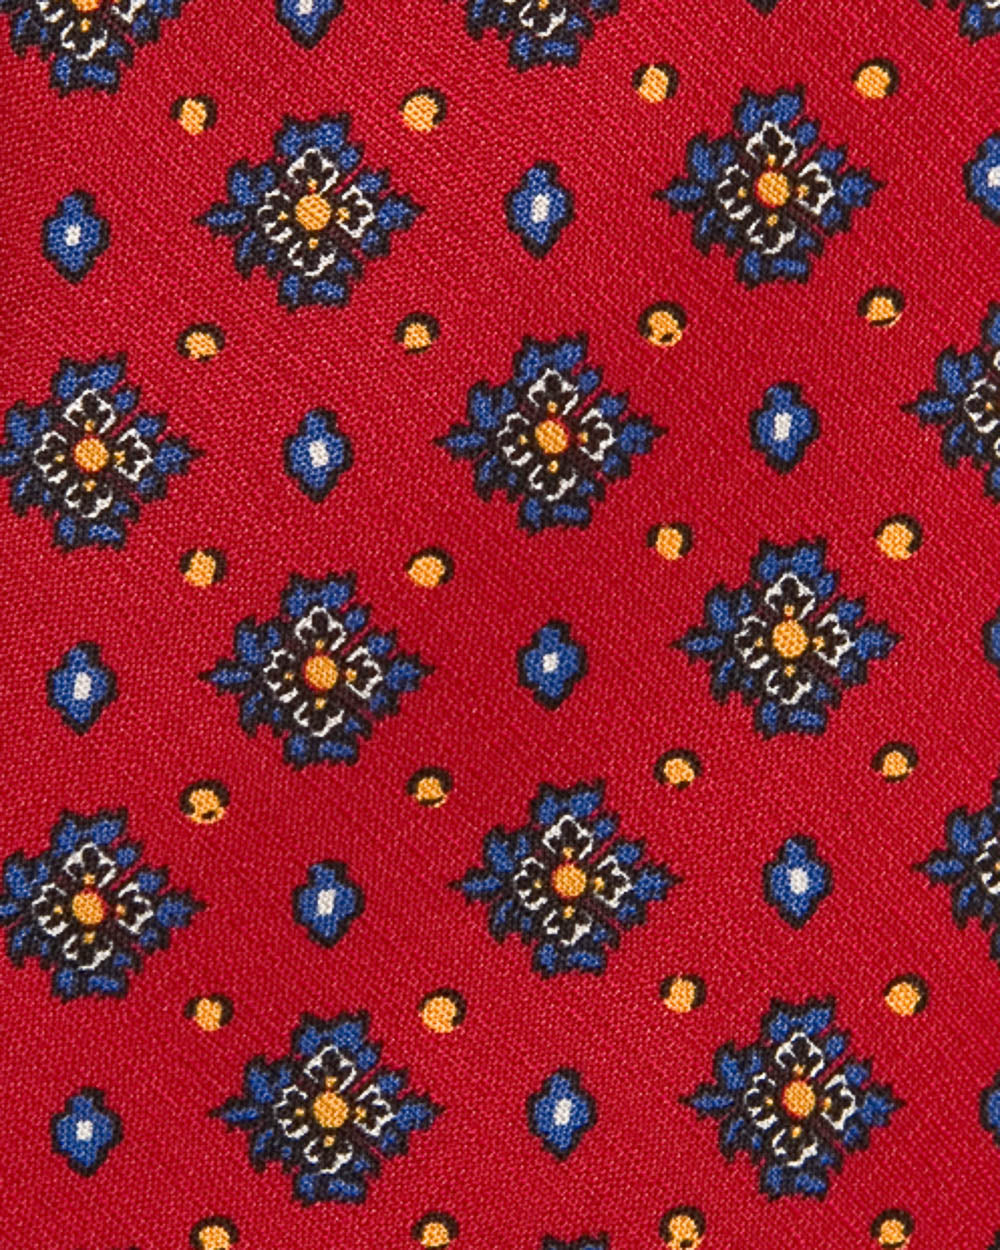 Red with Royal Blue and Yellow Floral Tie